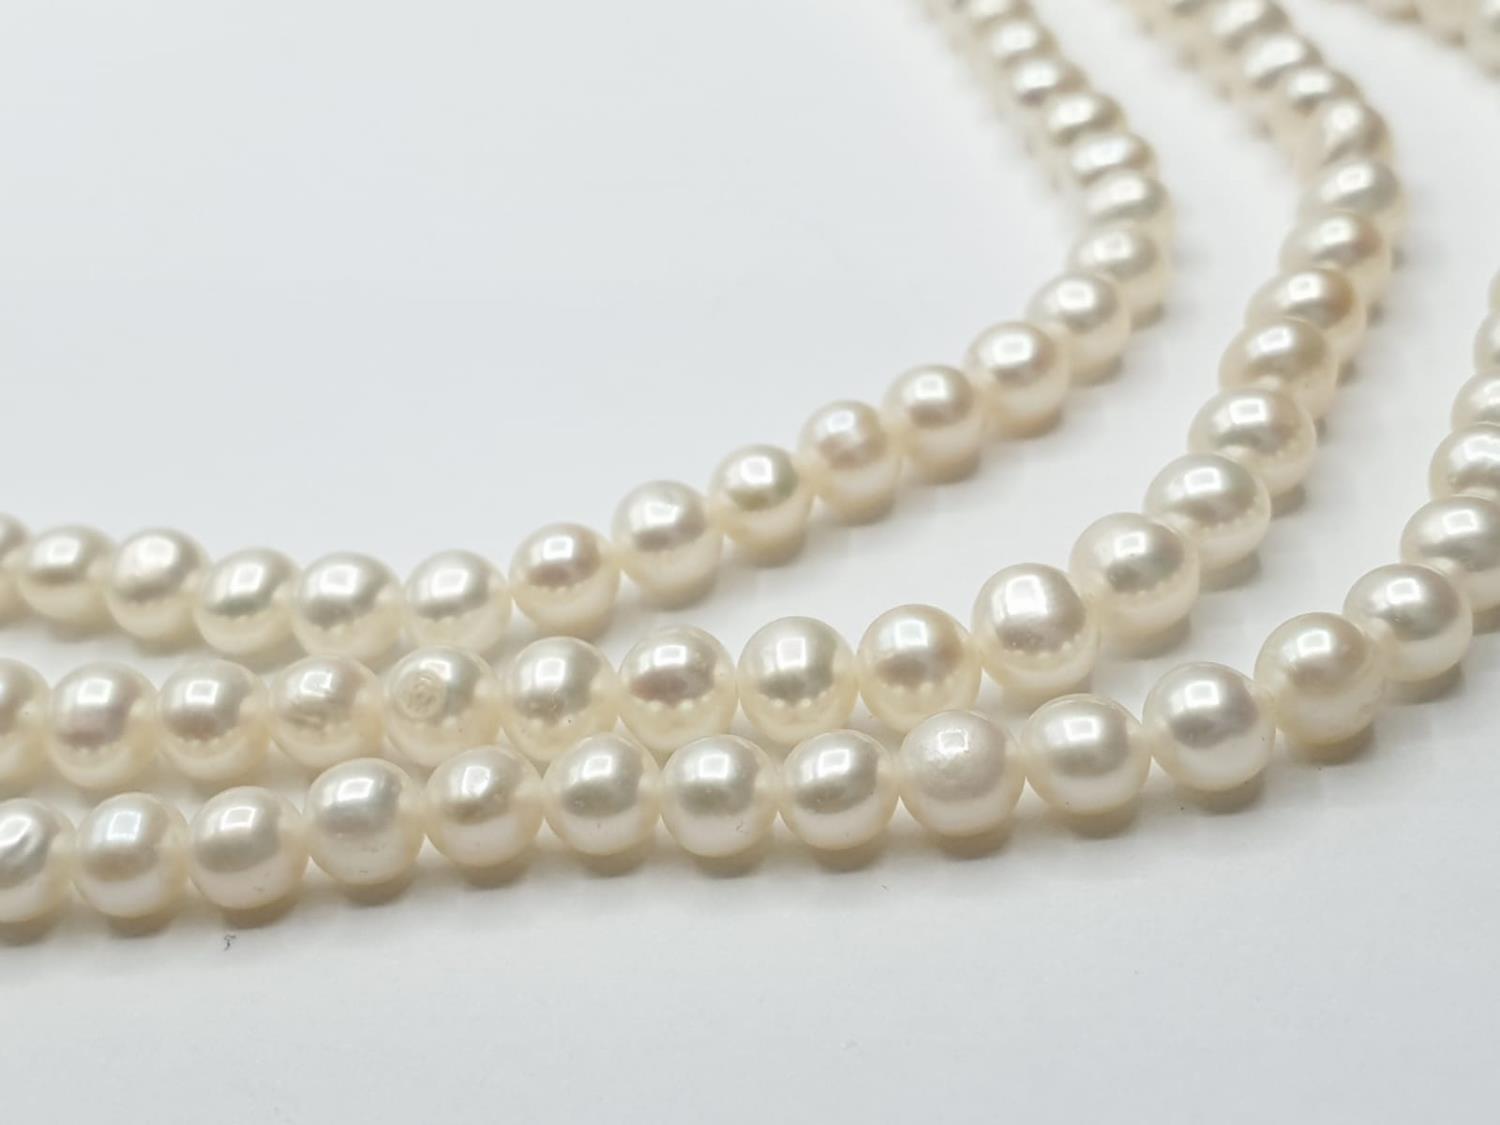 3 rows of Cultured pearl necklace set in 9ct gold clasp , weight 49g and 46cm long approx - Image 2 of 6